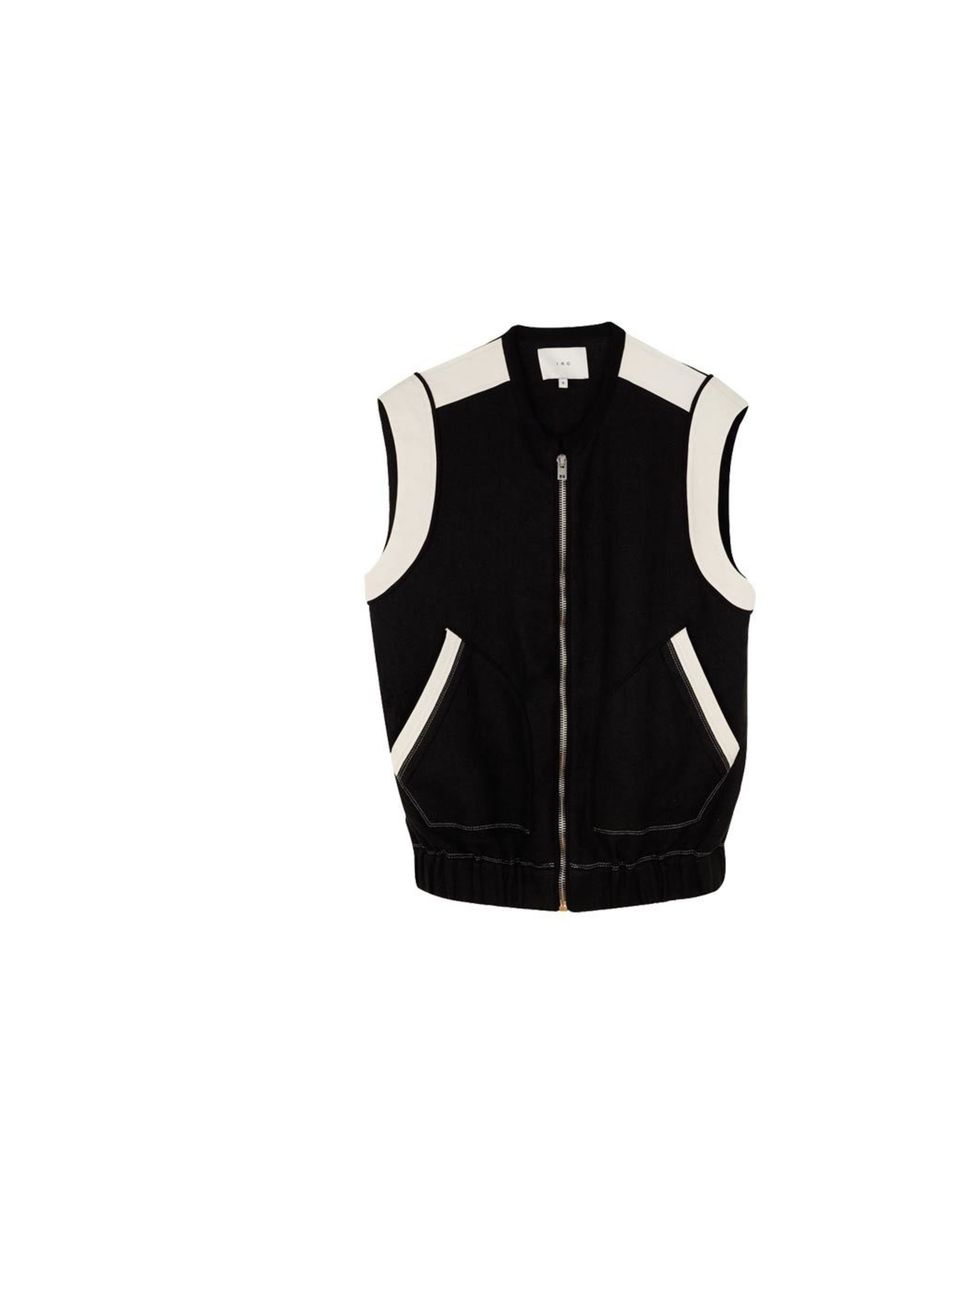 <p>Iro leather panel sleeveless jacket, £299, at <a href="http://www.urbanoutfitters.co.uk/iro-leather-panel-gilet/invt/5139465061576/&amp;colour=Black">Urban Outfitters</a></p>